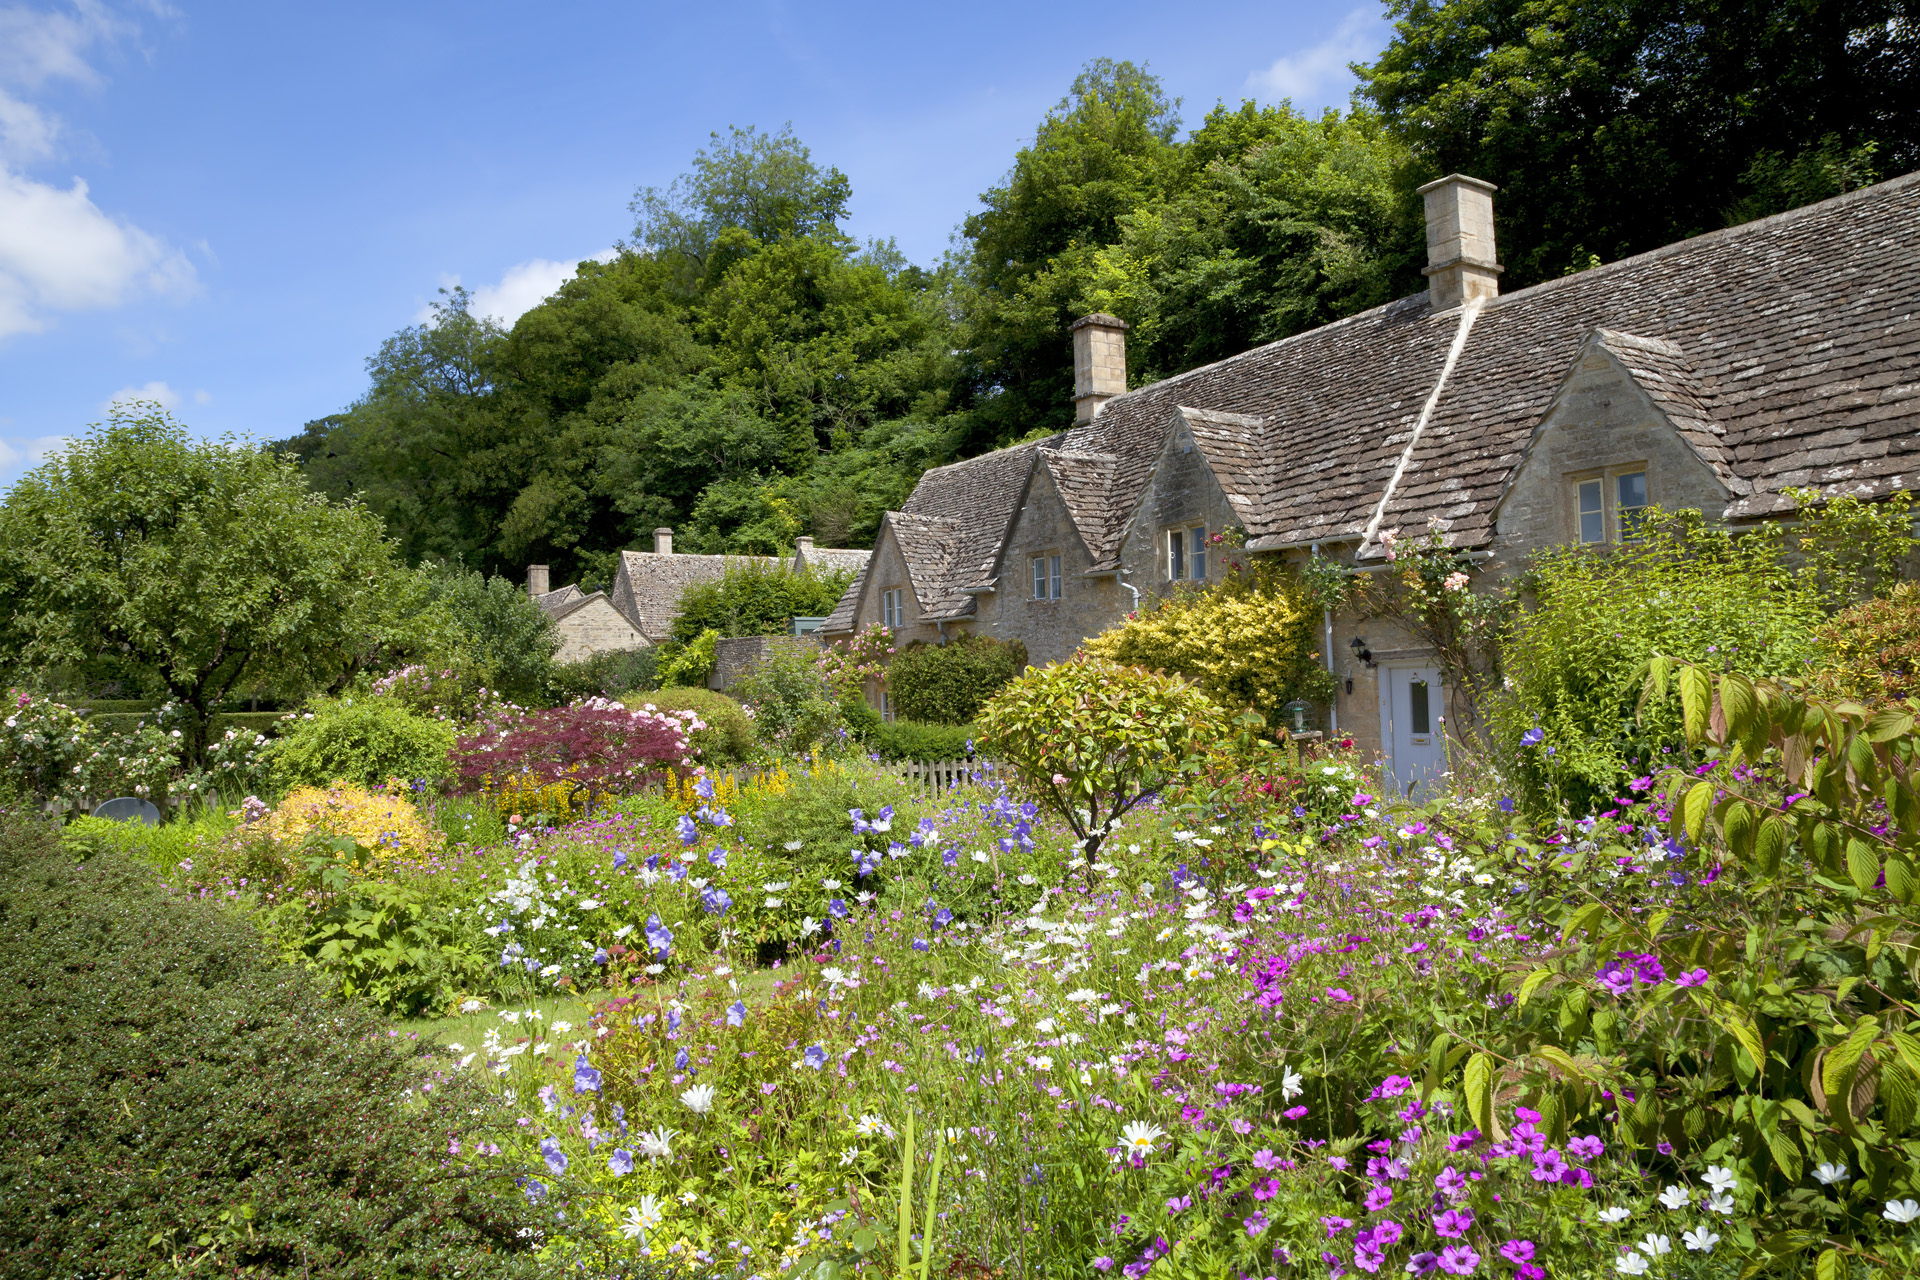 Cotswold cottage in the popular tourist destination of Bibury in the Cotswolds